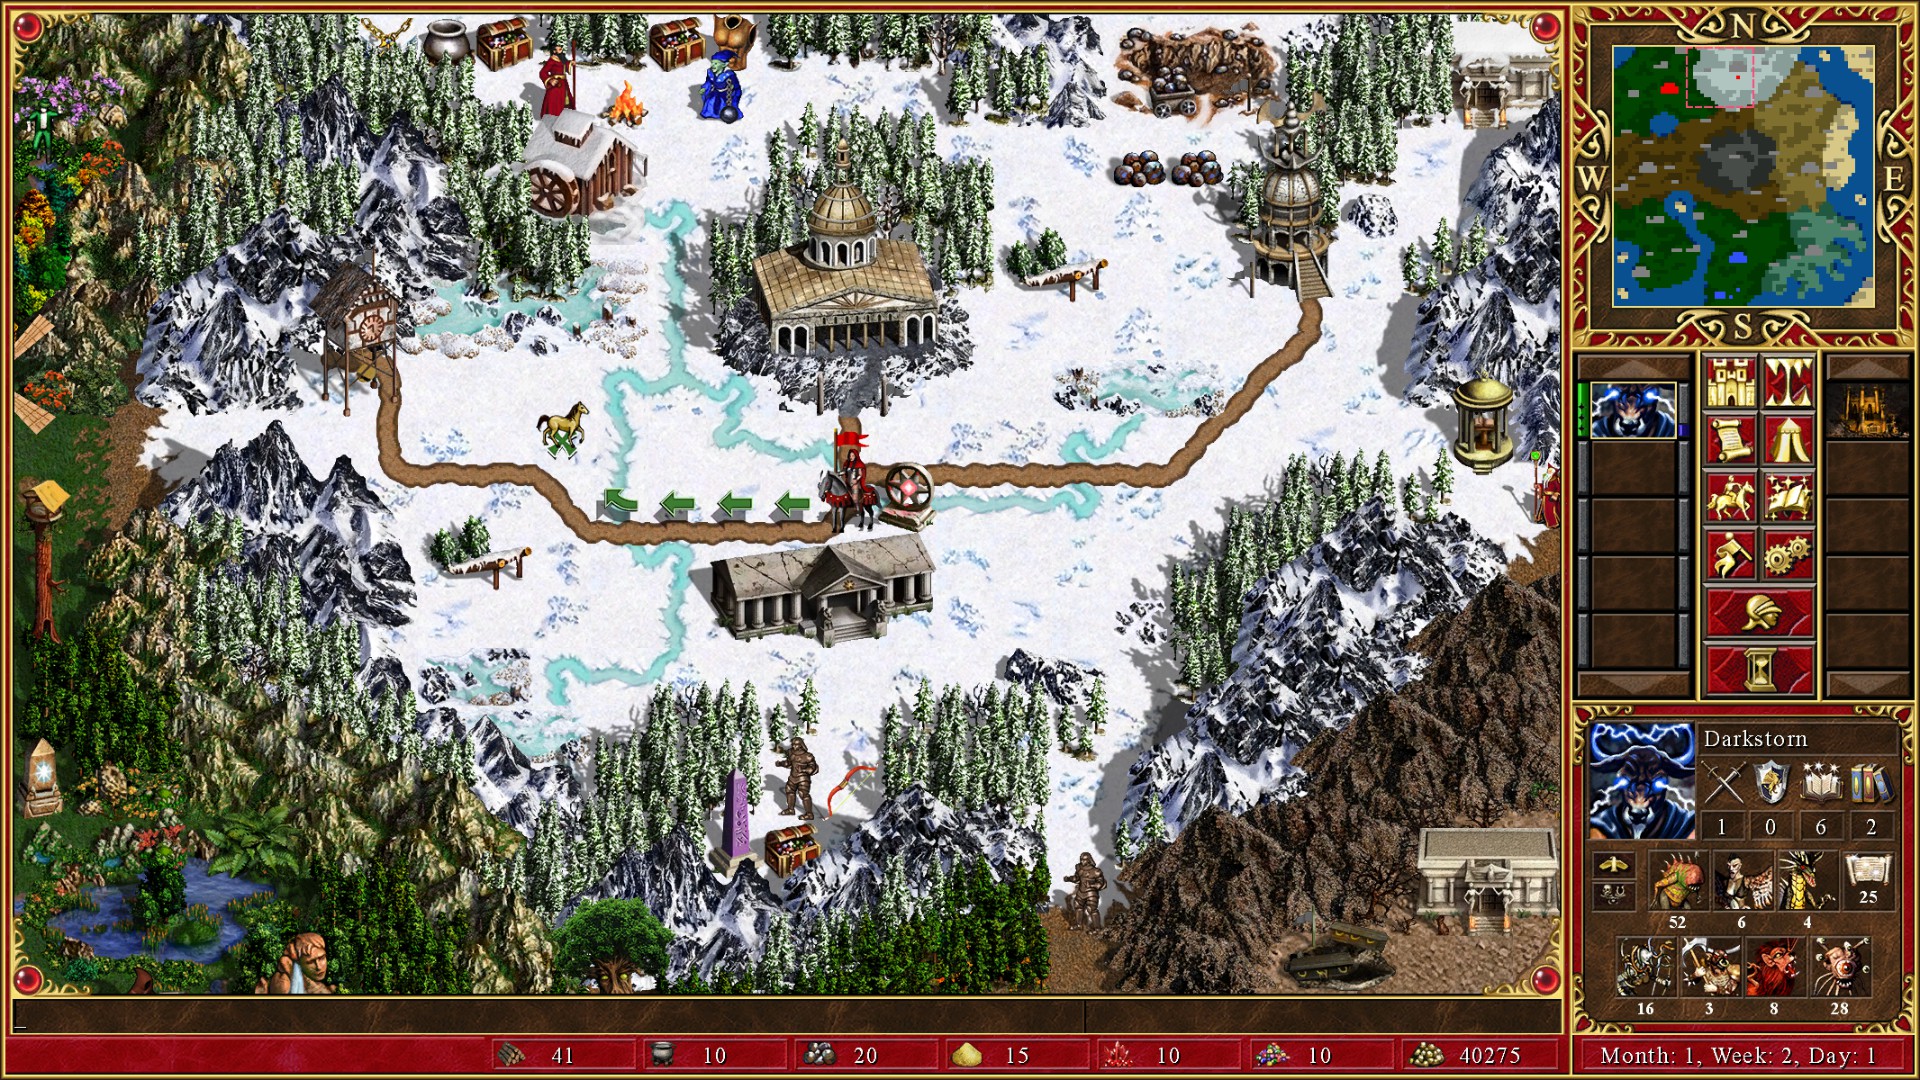 Heroes of might and magic 3 app store ts0502